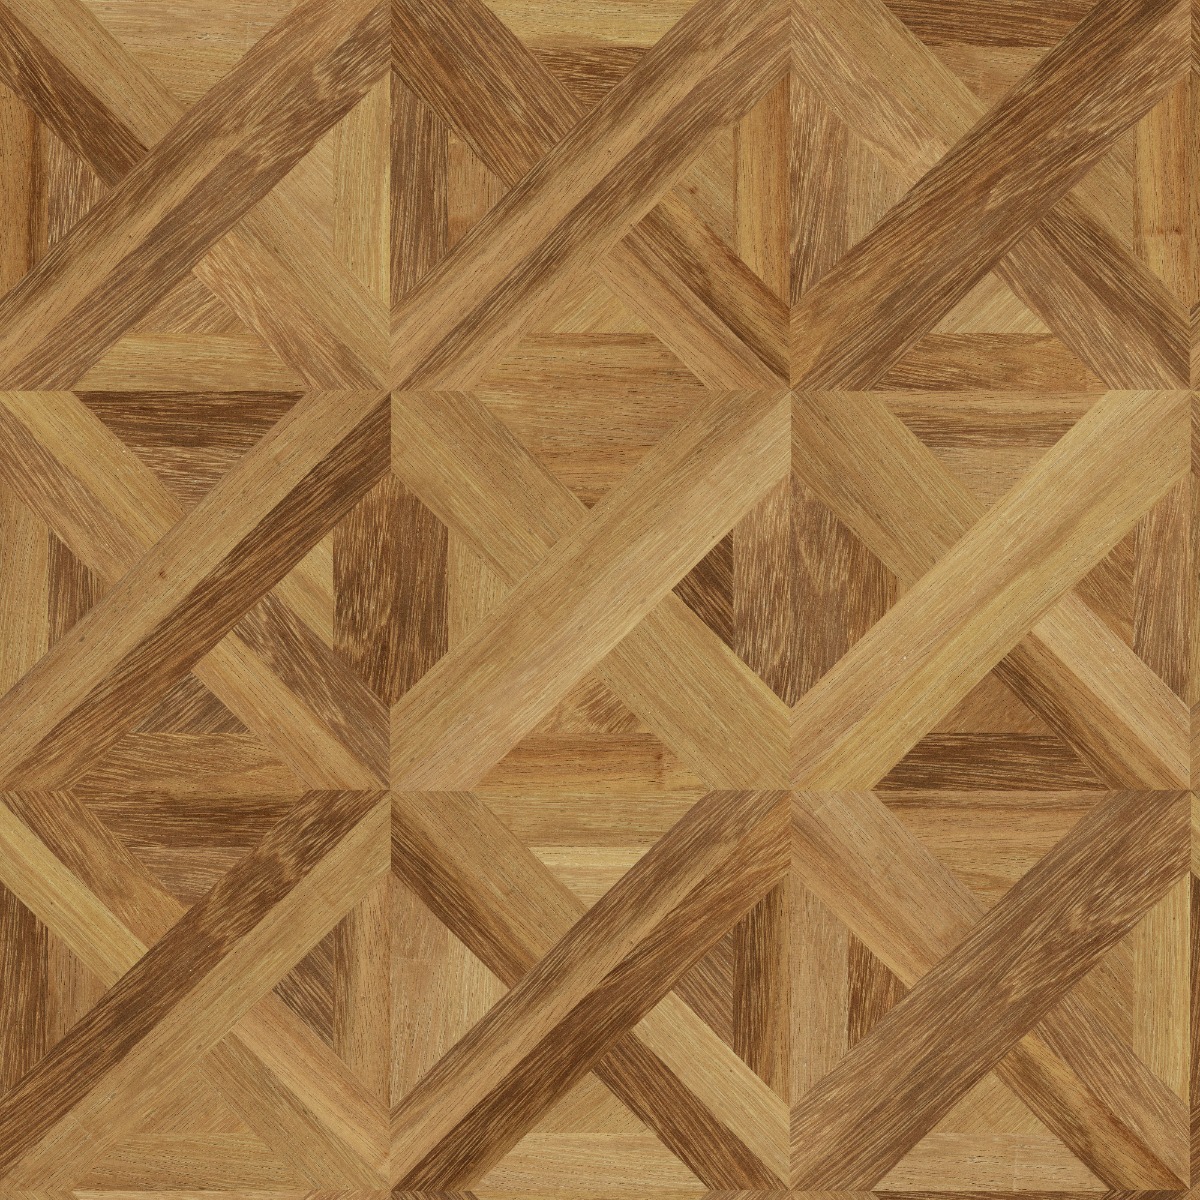 A seamless wood texture with iroko boards arranged in a Versailles pattern